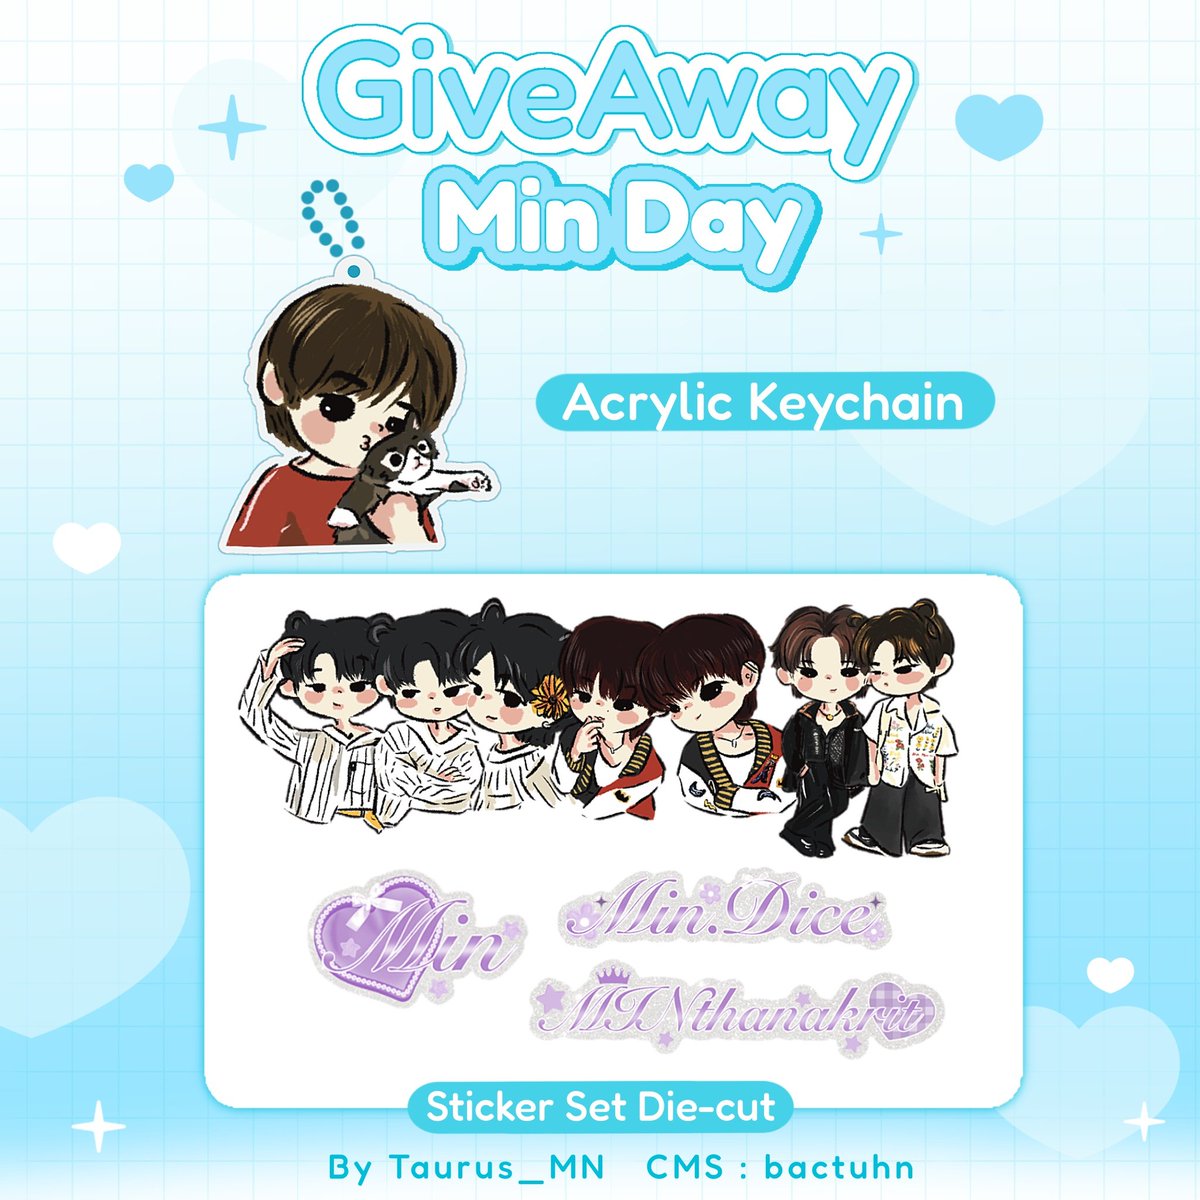 ☆ GiveAway Min Day ☆

     - Acrylic Keychain   1ea
     -Sticker Set Die-cut   1ea
                 Only 30 set

gg form : 09/05/24
⏰time : 20 : 30
📮Shipping : 45฿

#Minthanakrit #DICE_SONRAY
#แจกครับมารับDICE